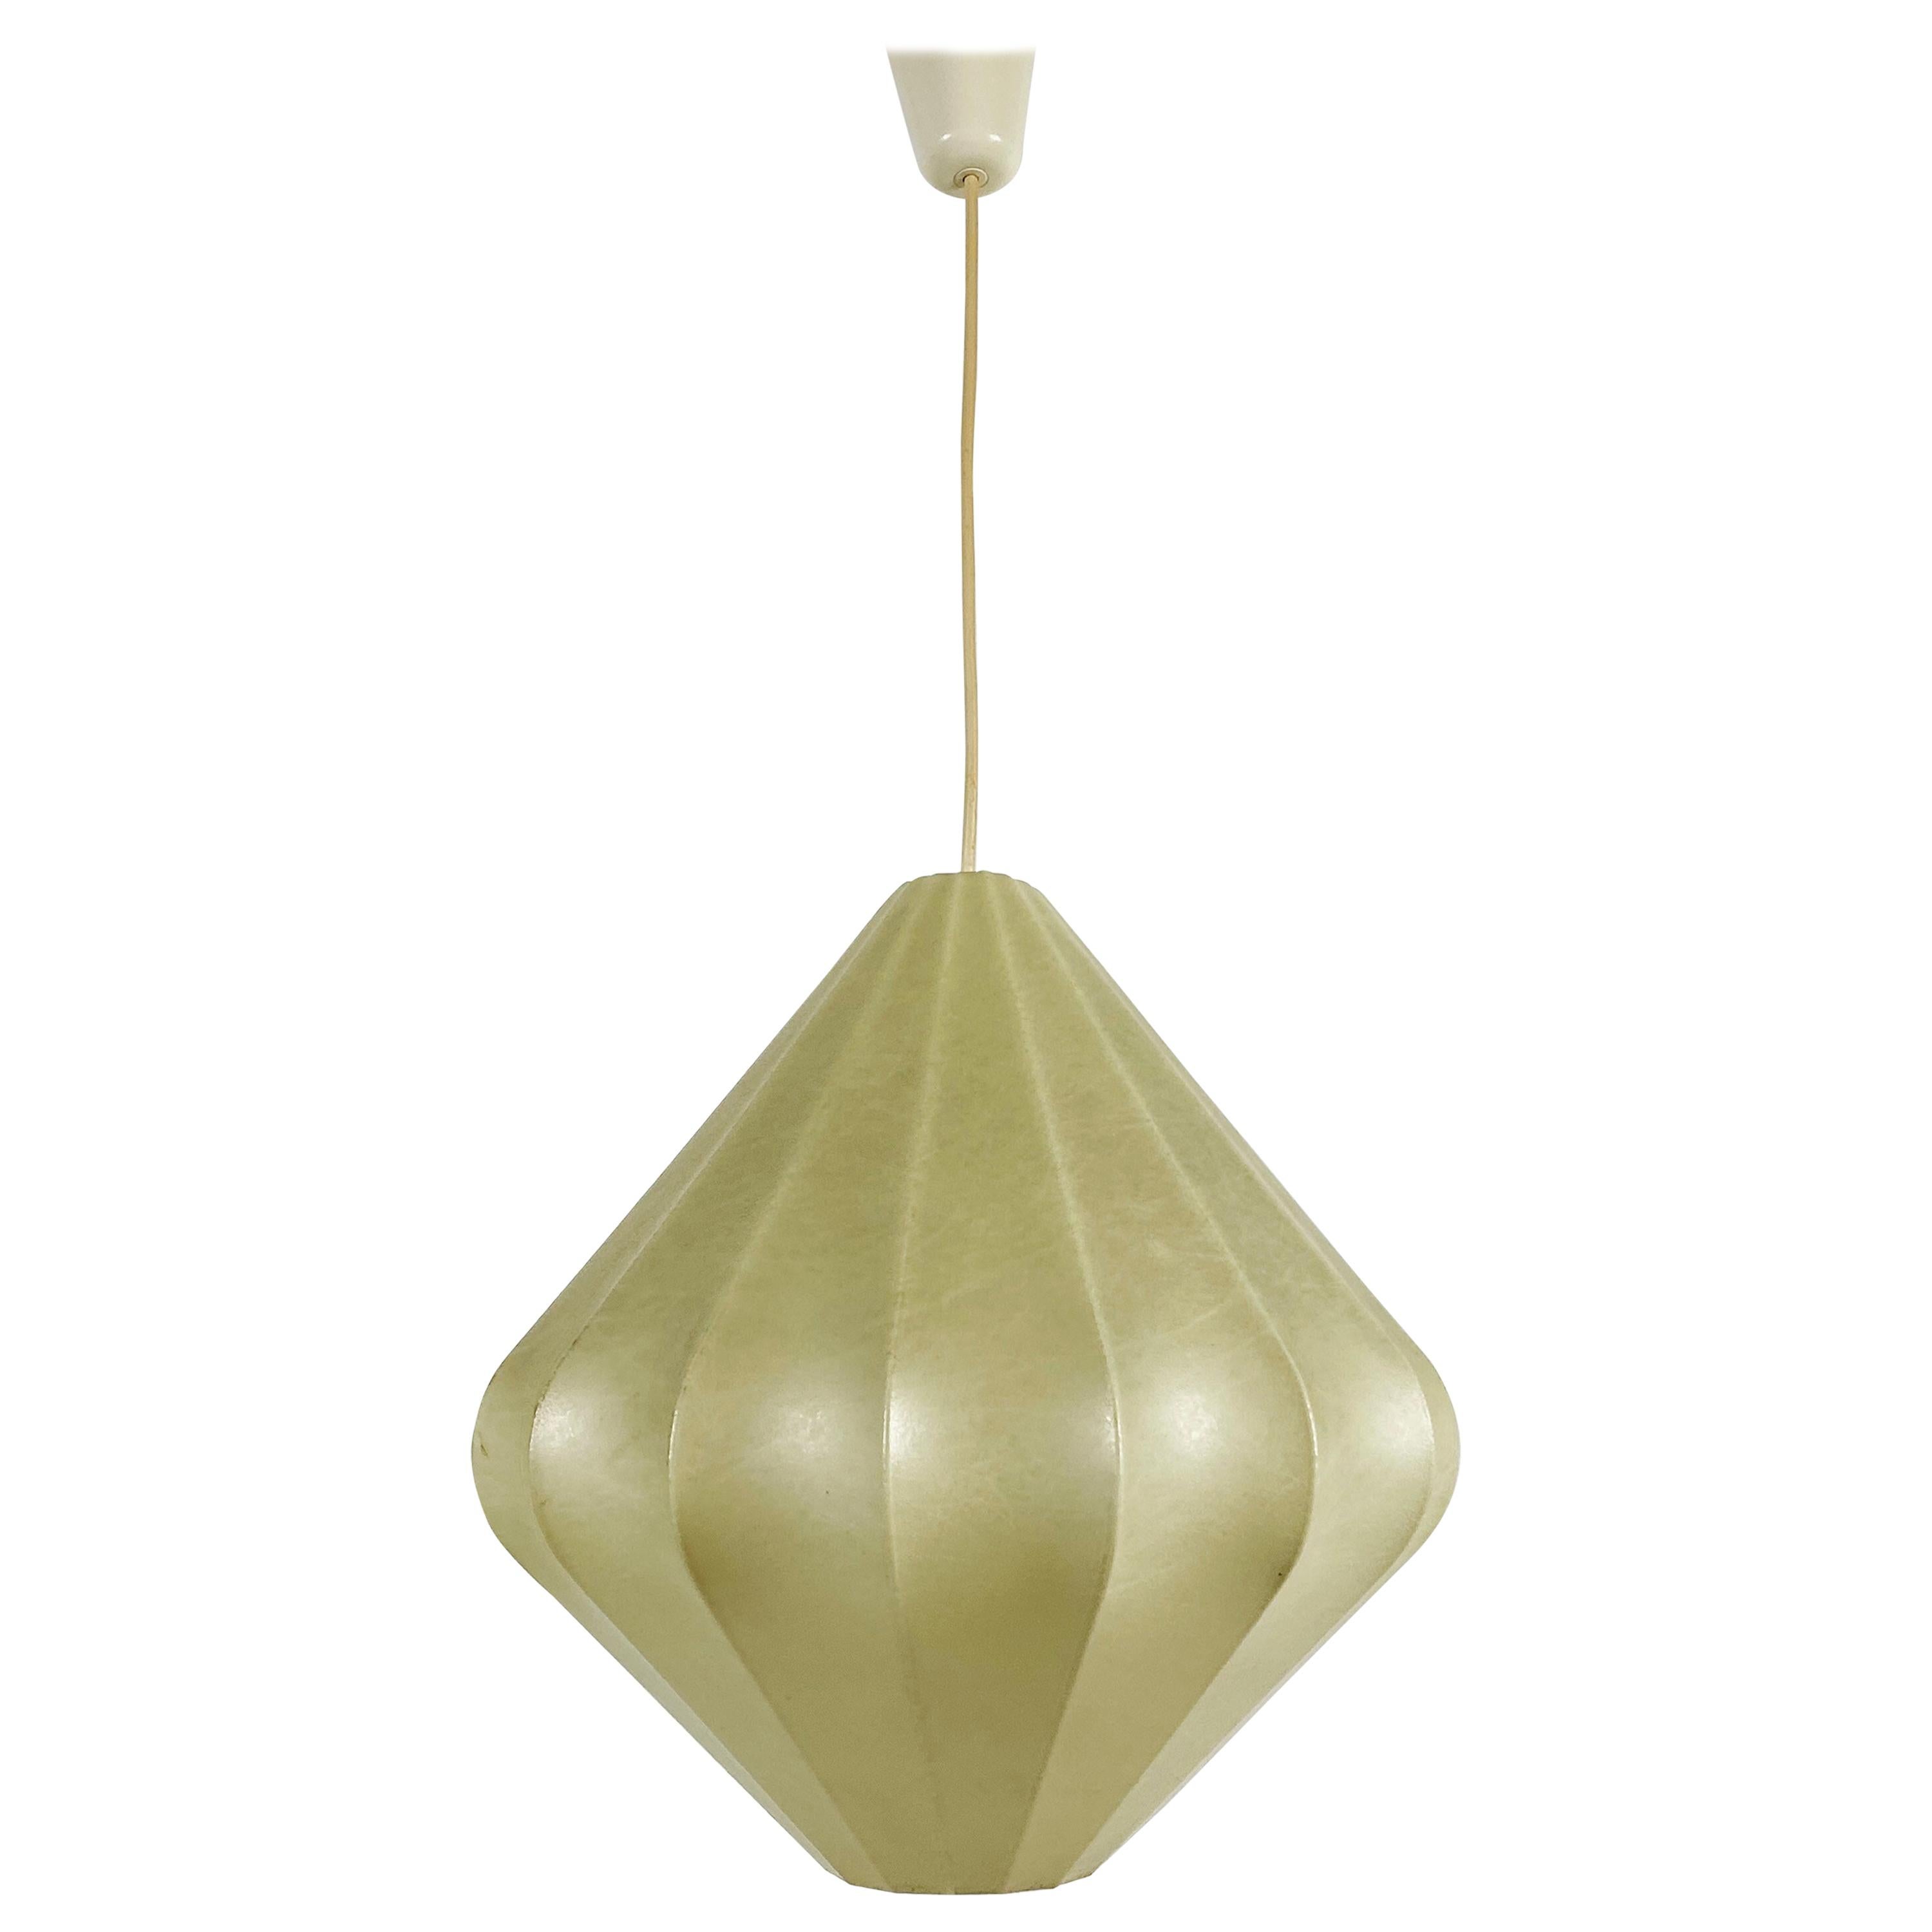 Midcentury Cocoon Pendant Light by Achille Castiglioni for Flos, 1960s, Italy